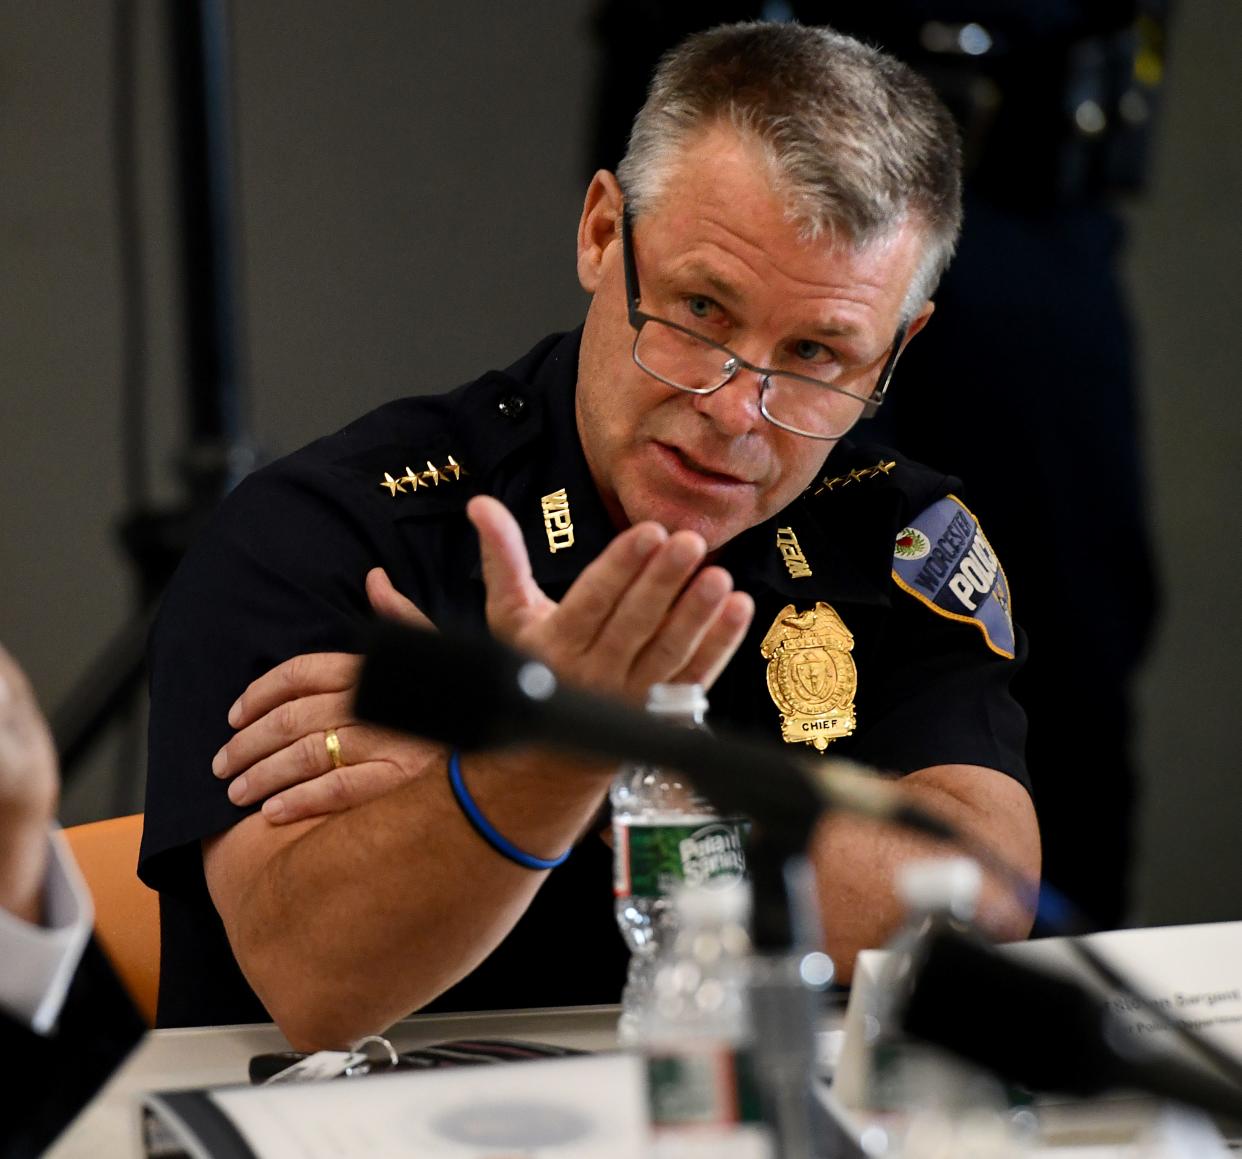 Steven Sargent, shown during a July roundtable event, resigned as police chief in September.